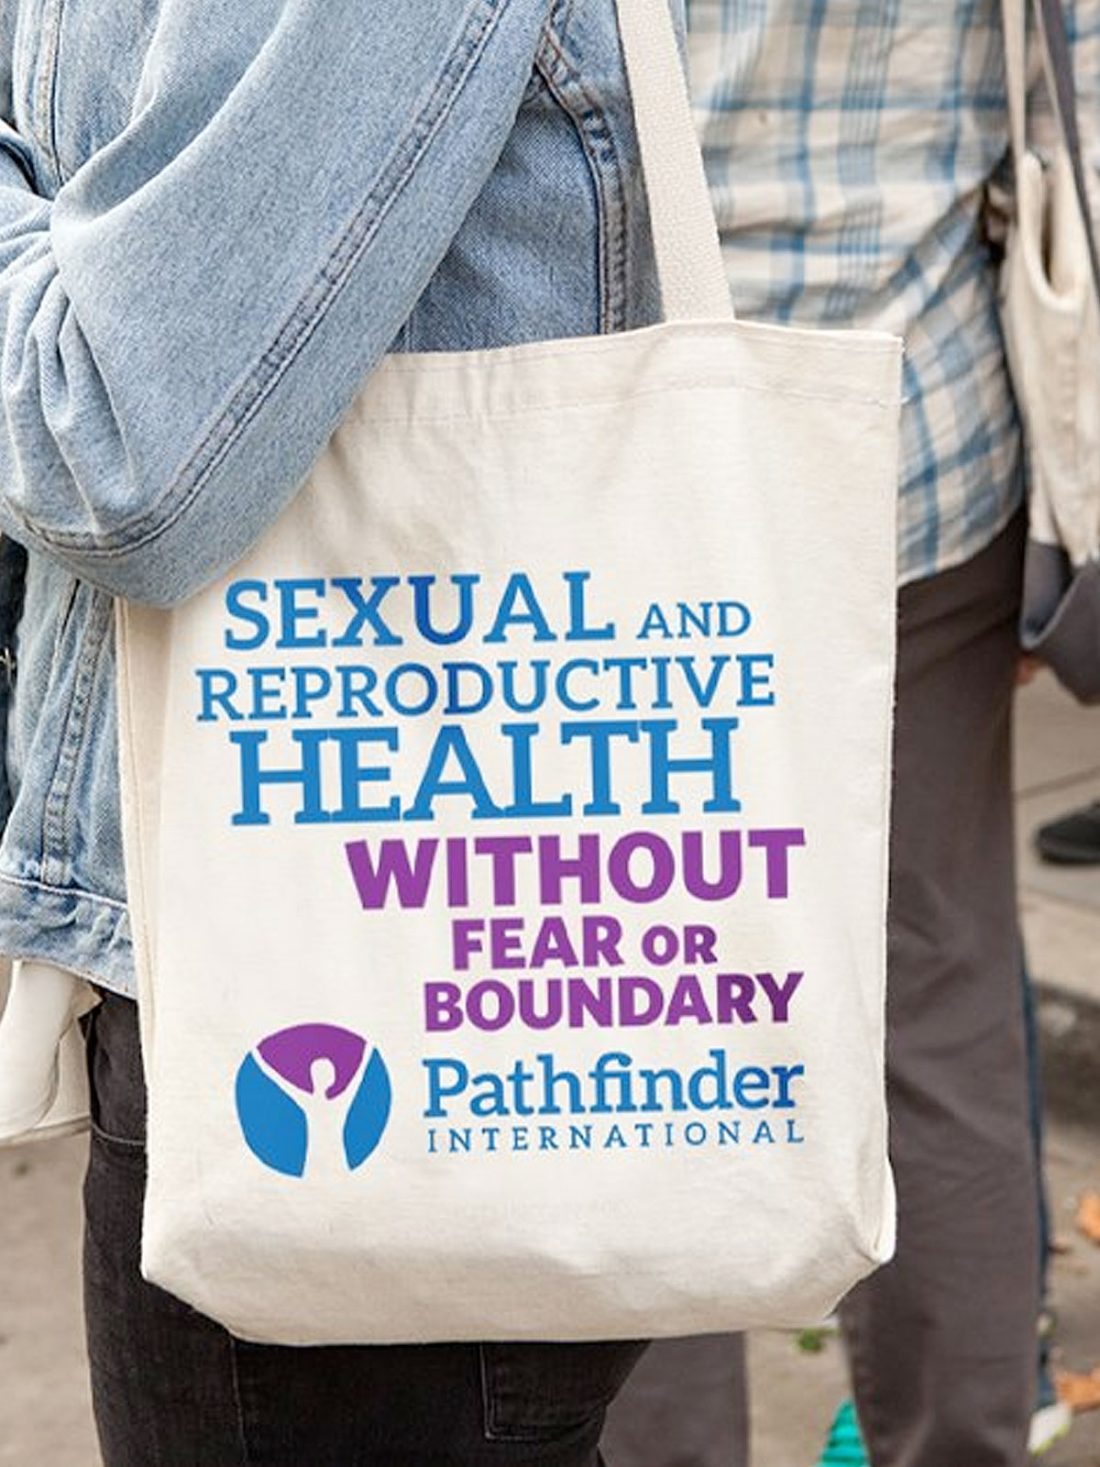 Pathfinder International tote bag that says "Sexual and reproductive health without fear or boundary."